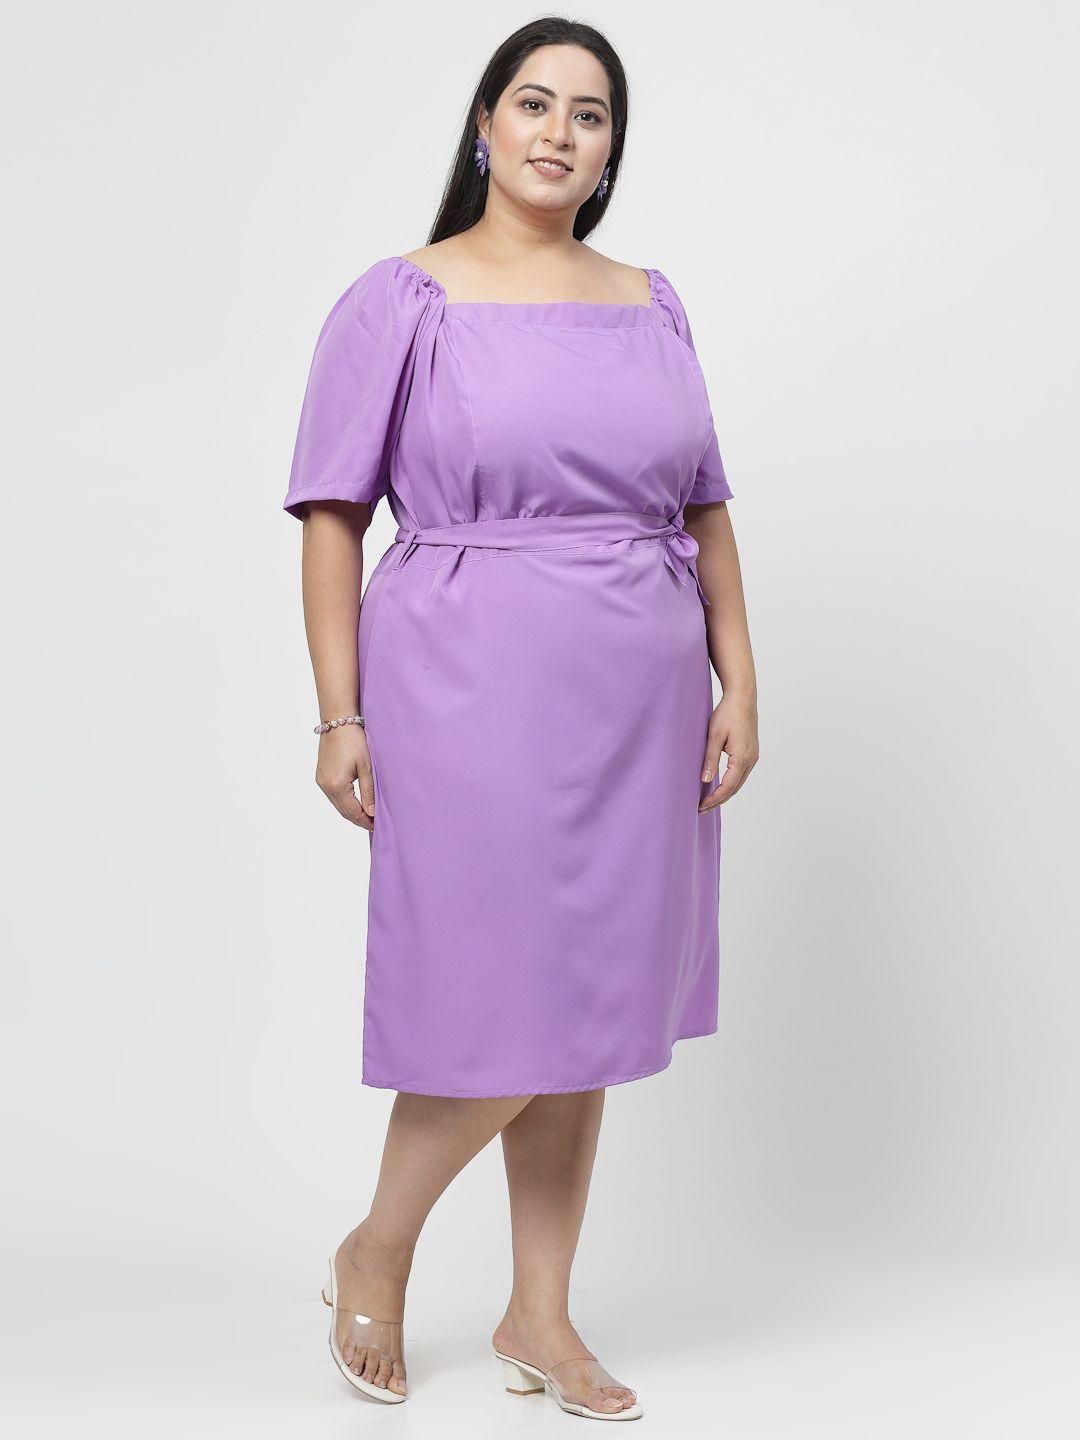 Flambeur Plus Size Lavender Solid Flared Short Dress for Women